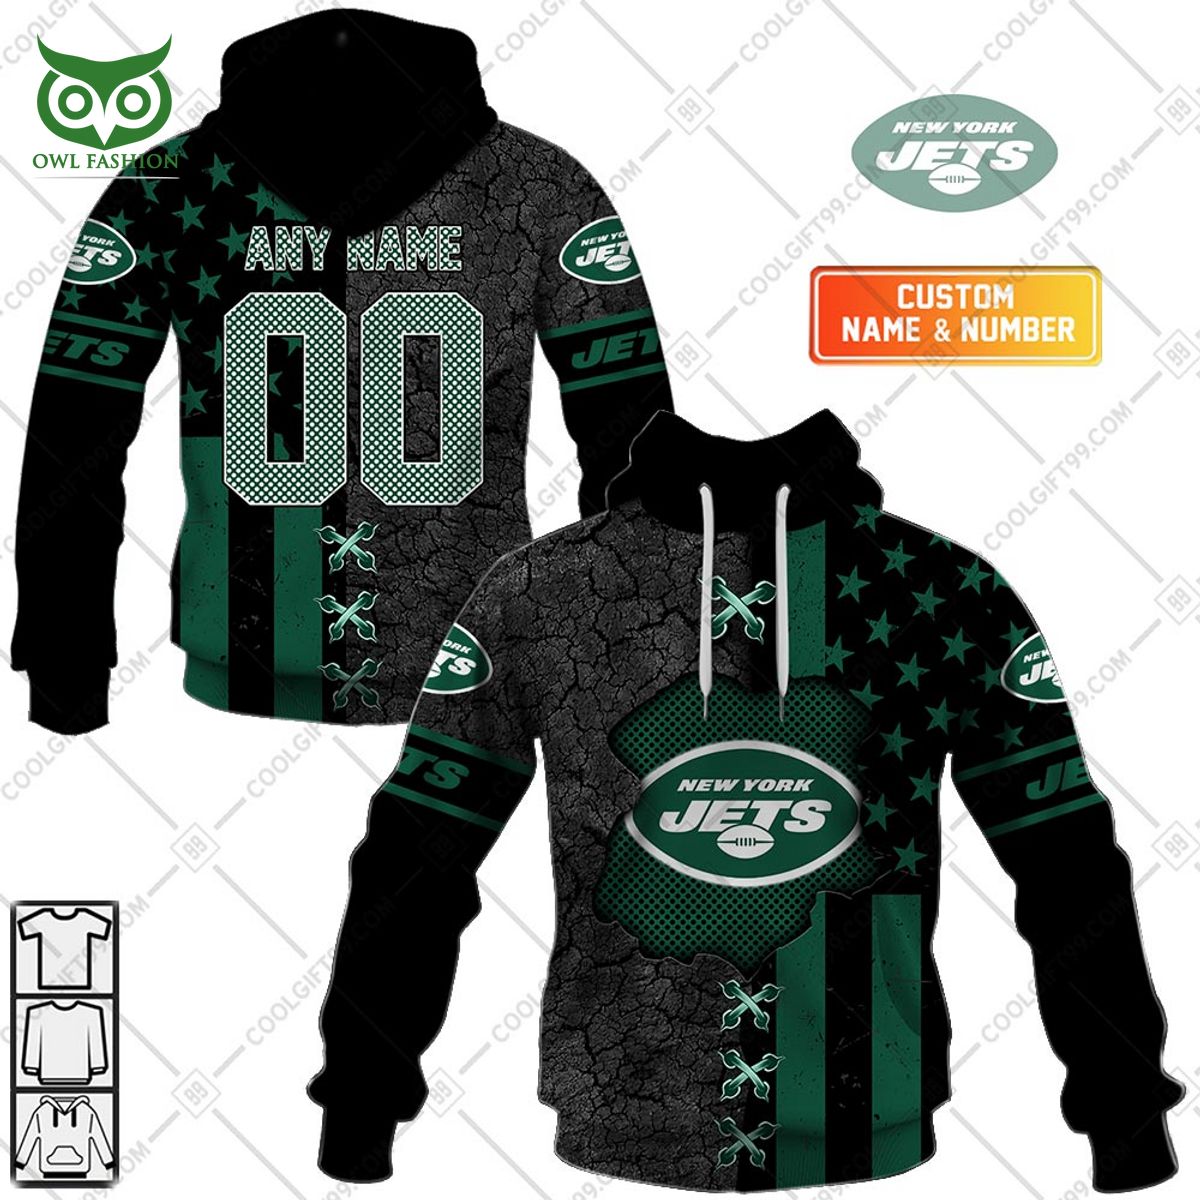 NFL New York Jets USA flag custom hoodie shirt printed Out of the world